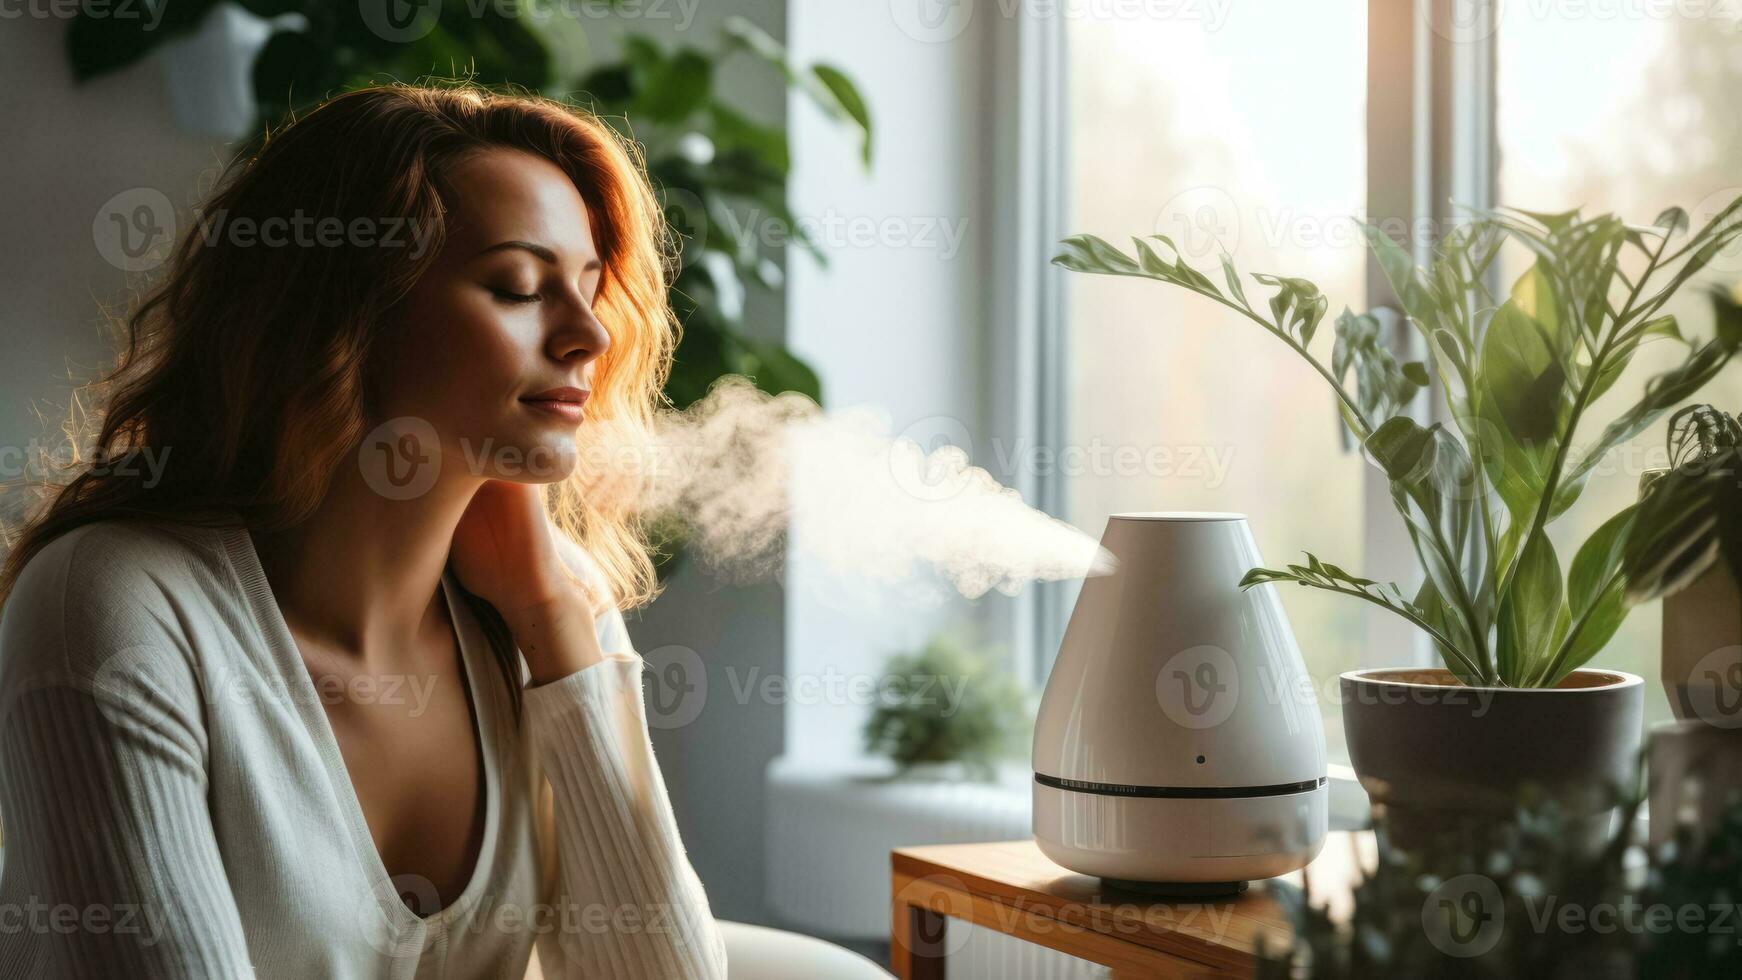 Person using humidifier indoors to alleviate autumn cold symptoms photo